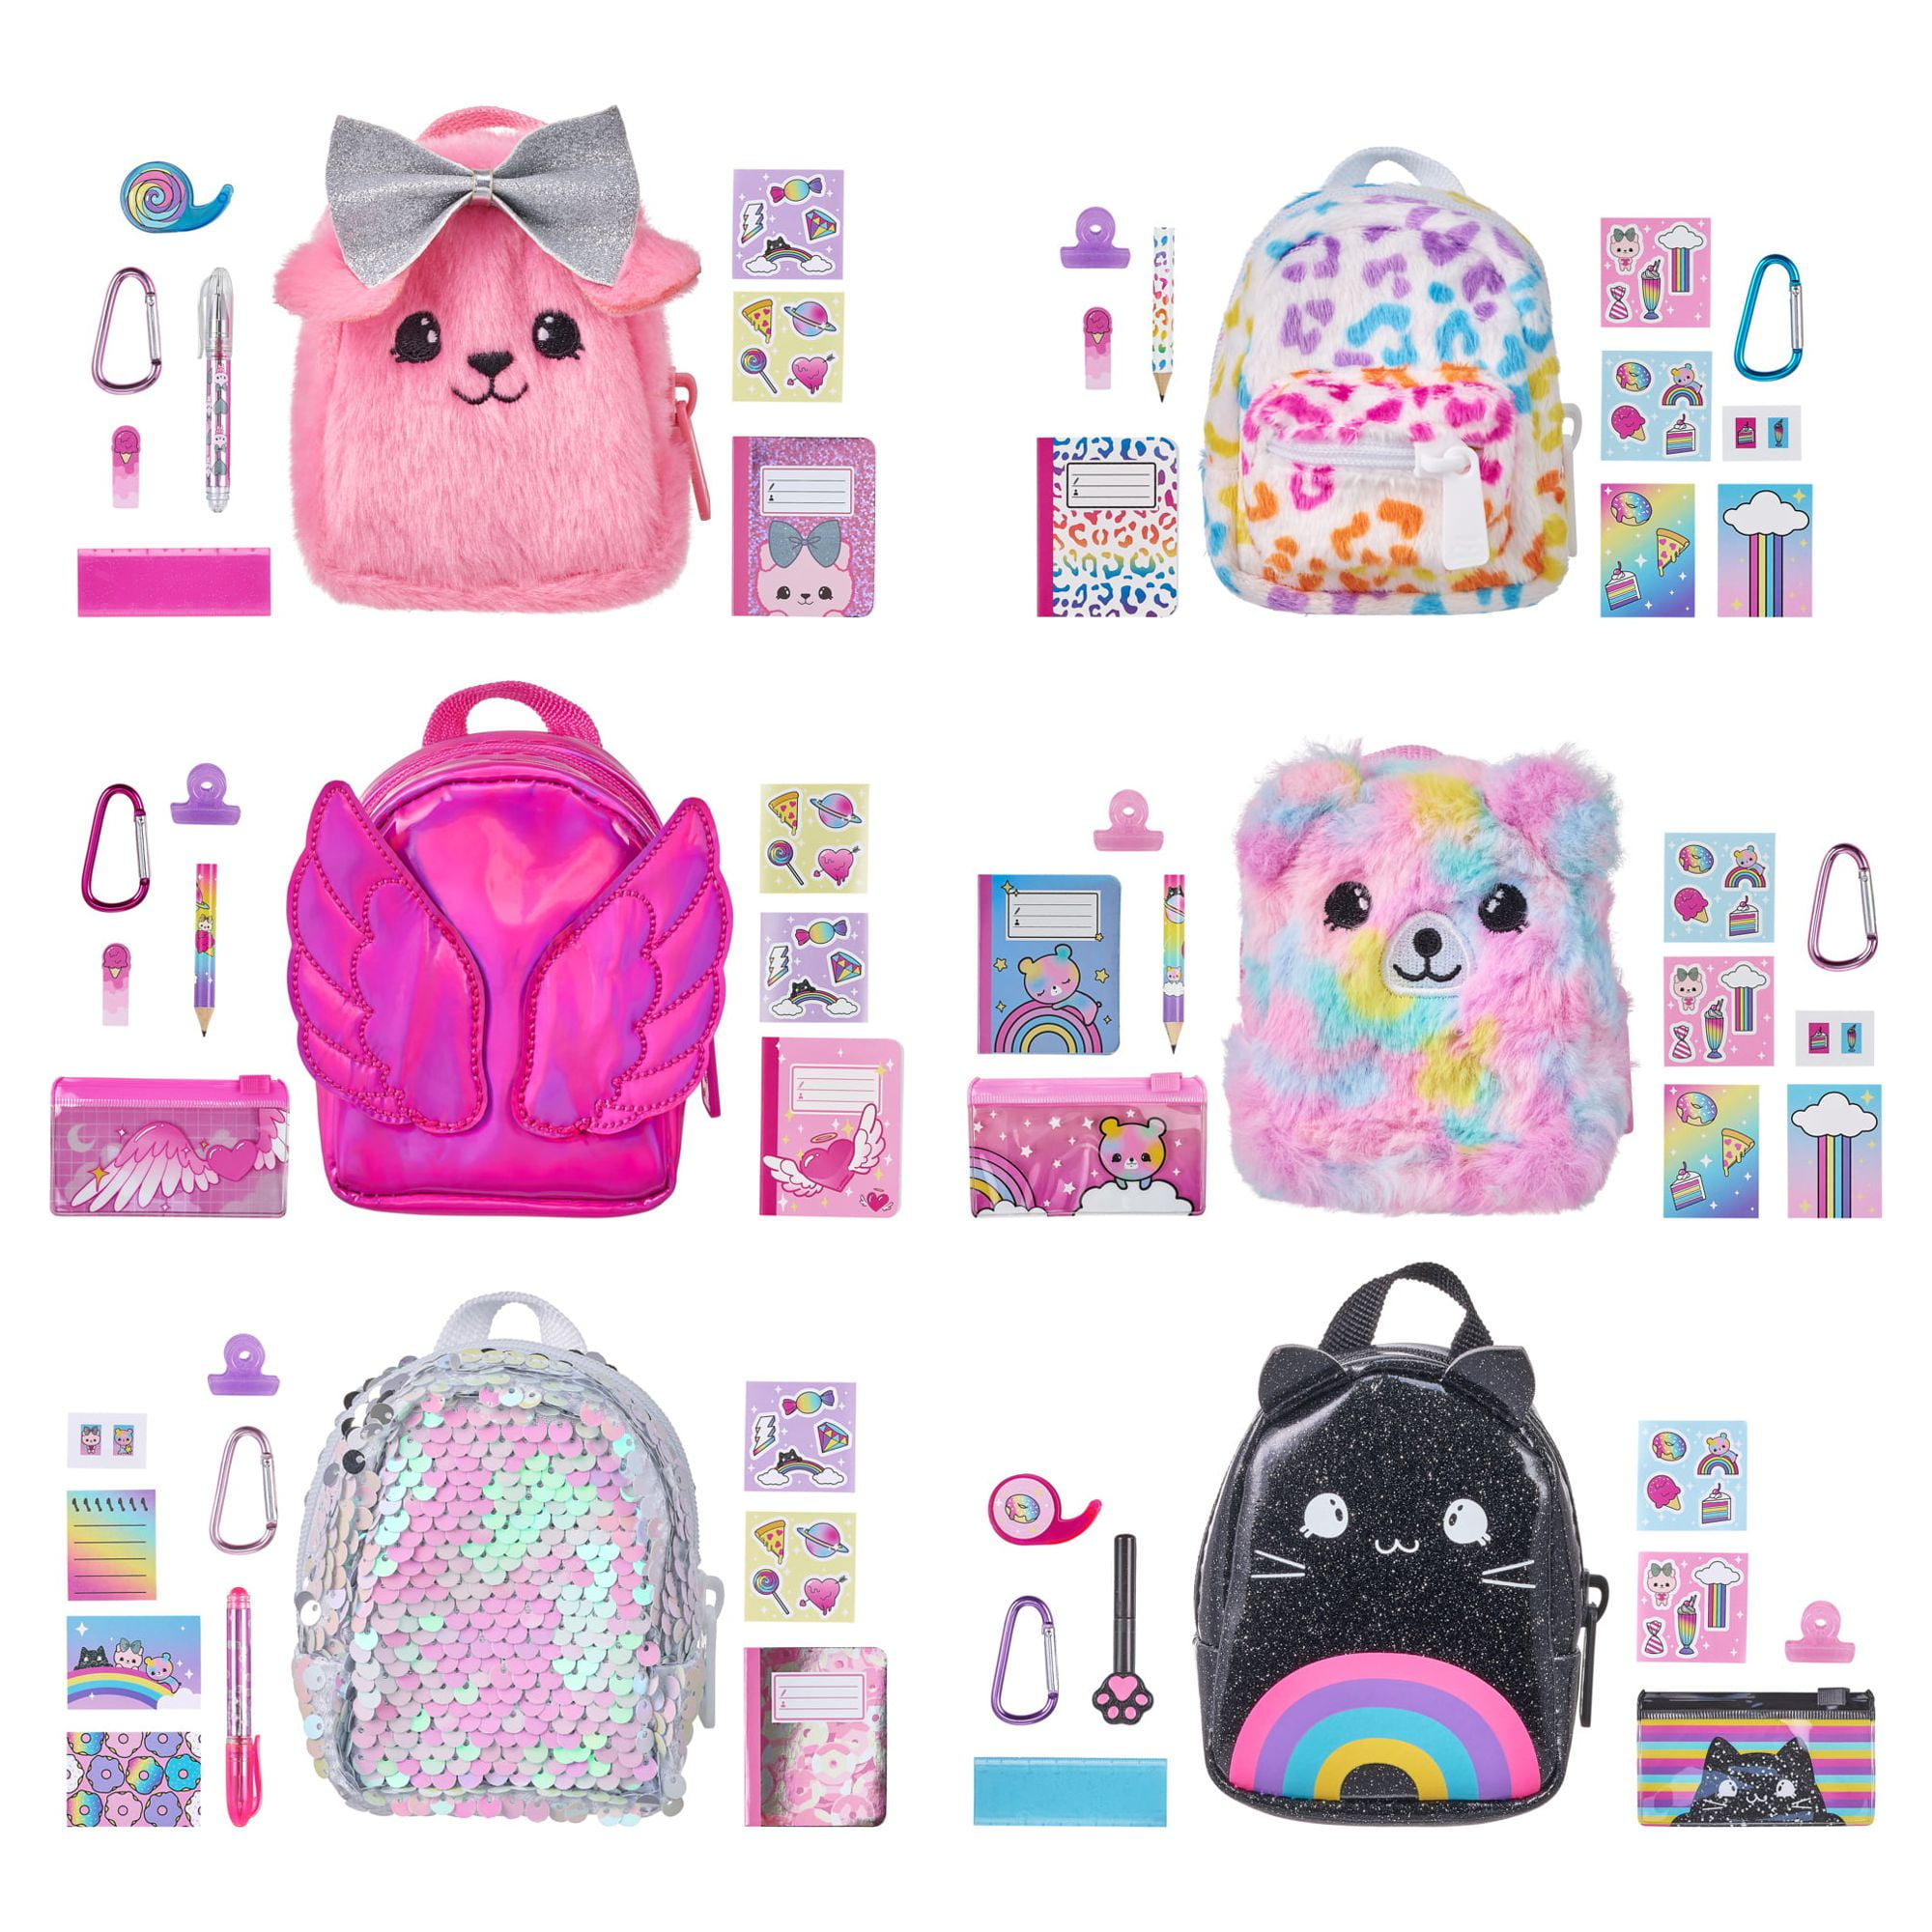 Mini Backpack with Stationery – Make It Real